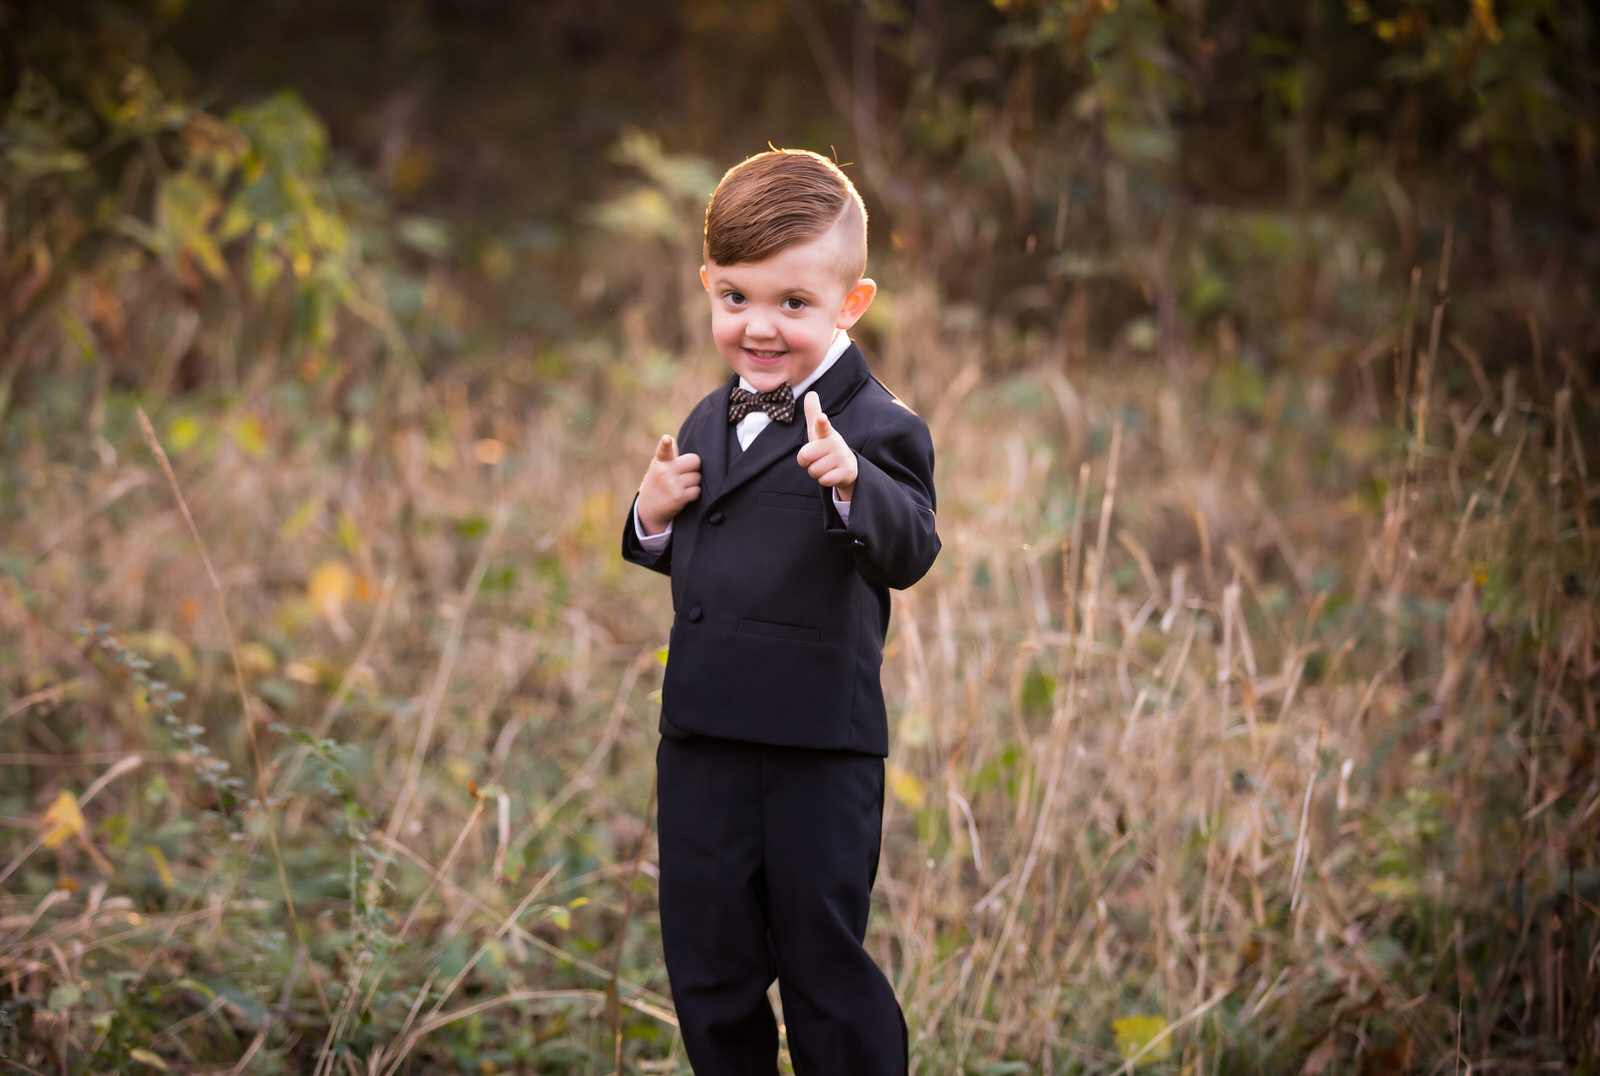 A young boy in a full suit and bowtie stands in a field of tall grass fort worth kids